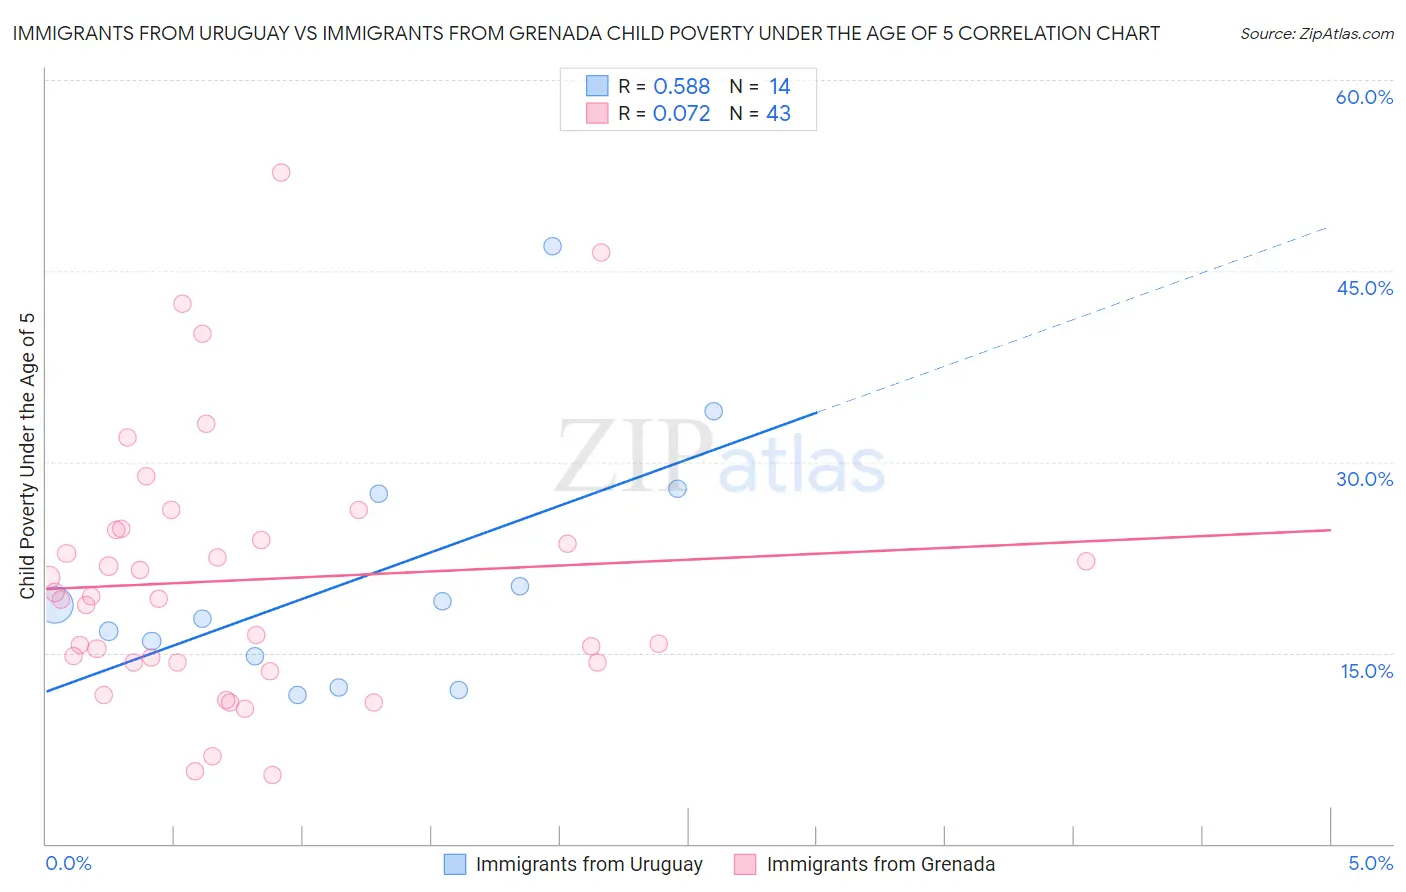 Immigrants from Uruguay vs Immigrants from Grenada Child Poverty Under the Age of 5